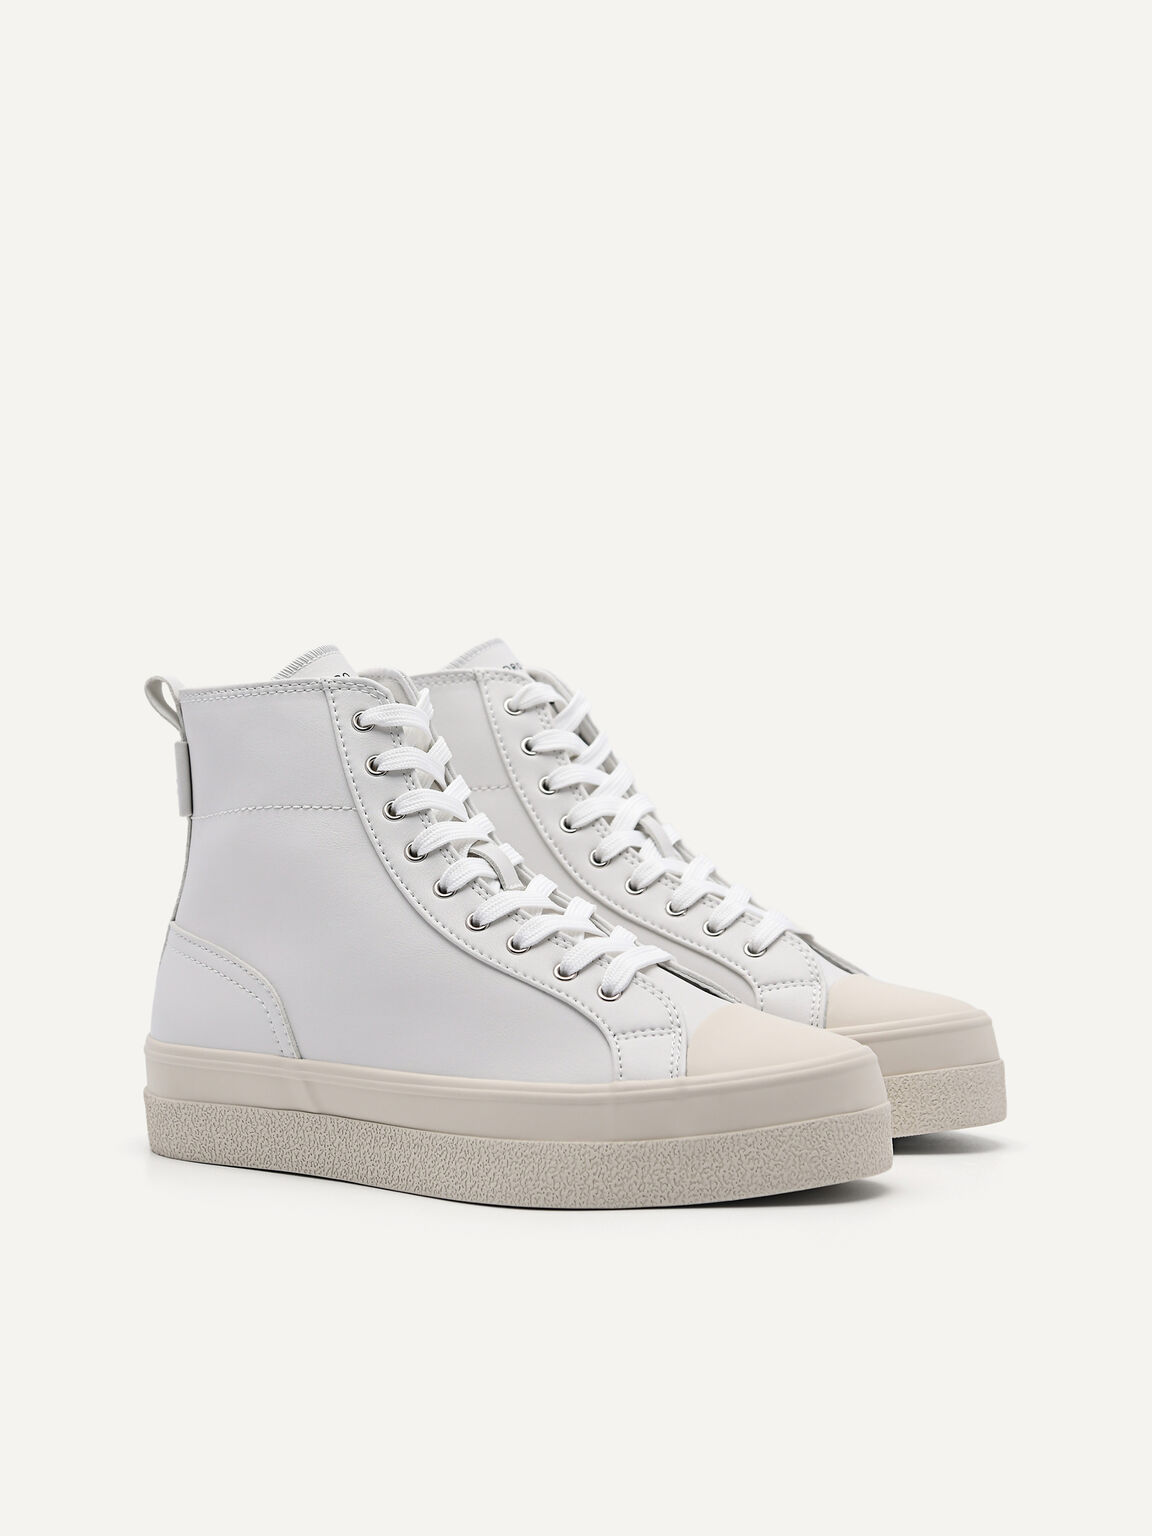 Synthetic Leather High-Cut Sneakers, White